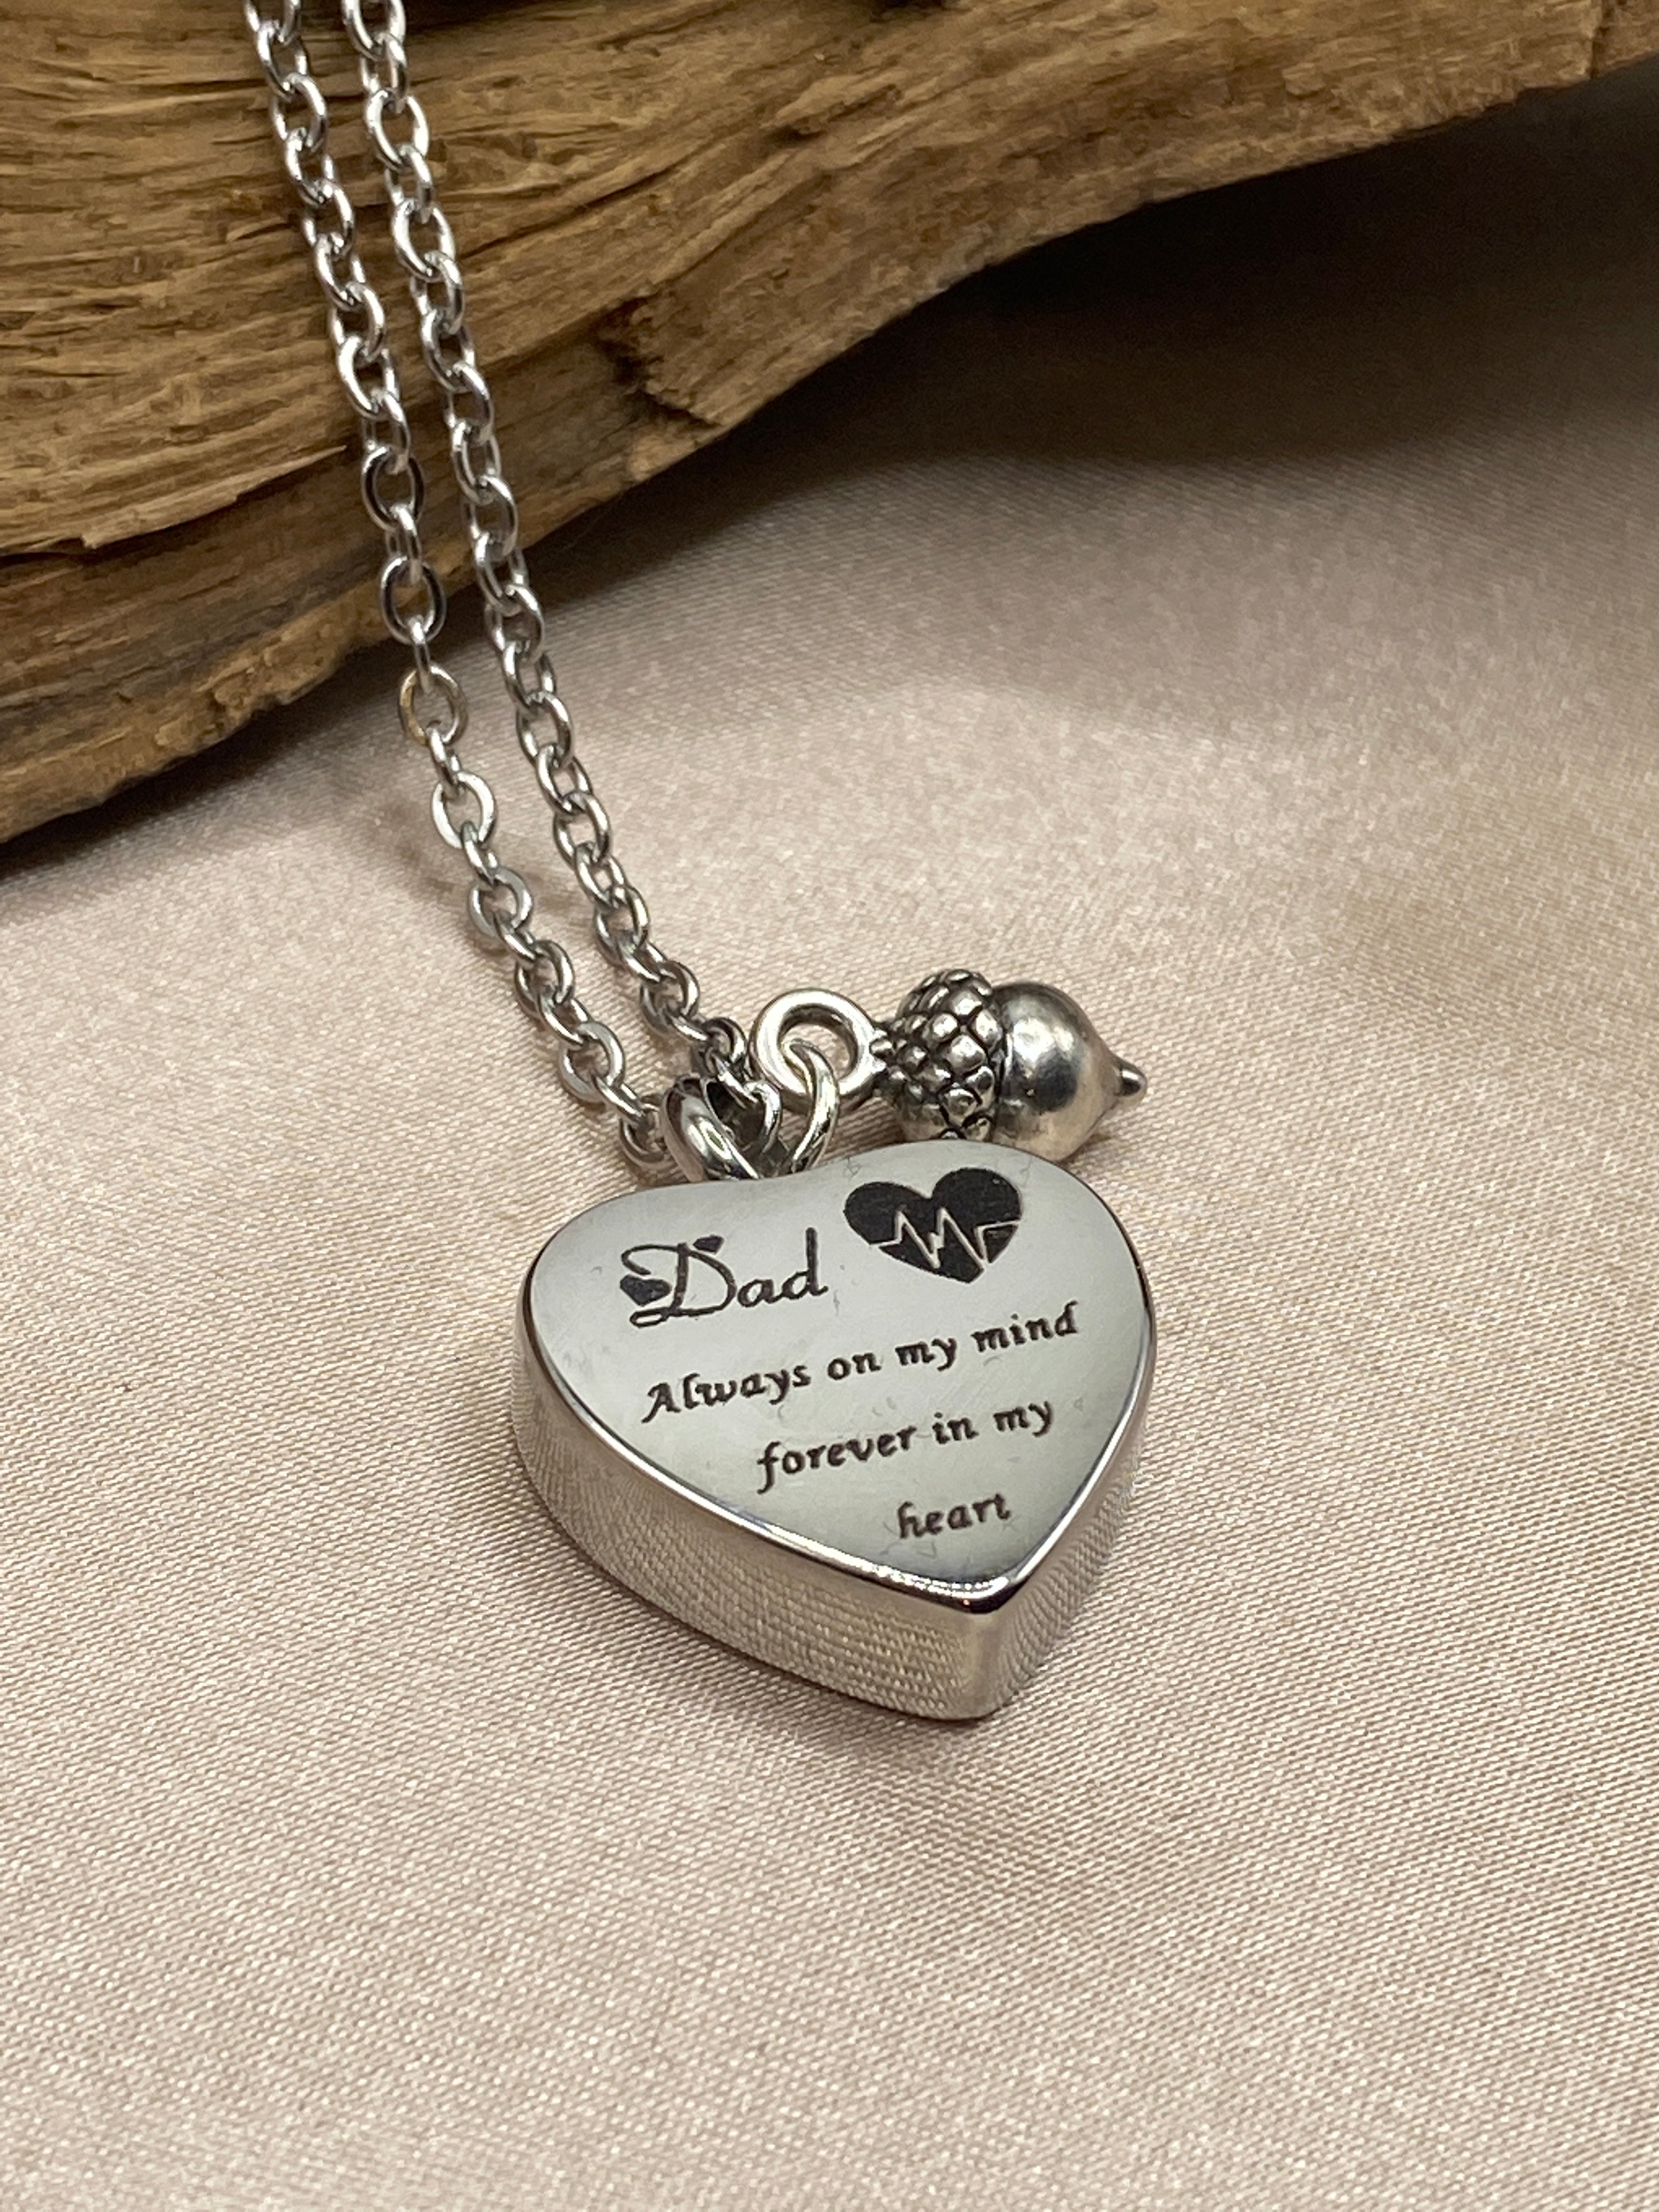 Personalized Dad In My Heart Memorial Pendant Ashes Urn Necklace For Human  Adults Ashes Houlder Keepsake For Funeral Cremation Cremation Jewelry From  Dgxxwj5566, $24.13 | DHgate.Com